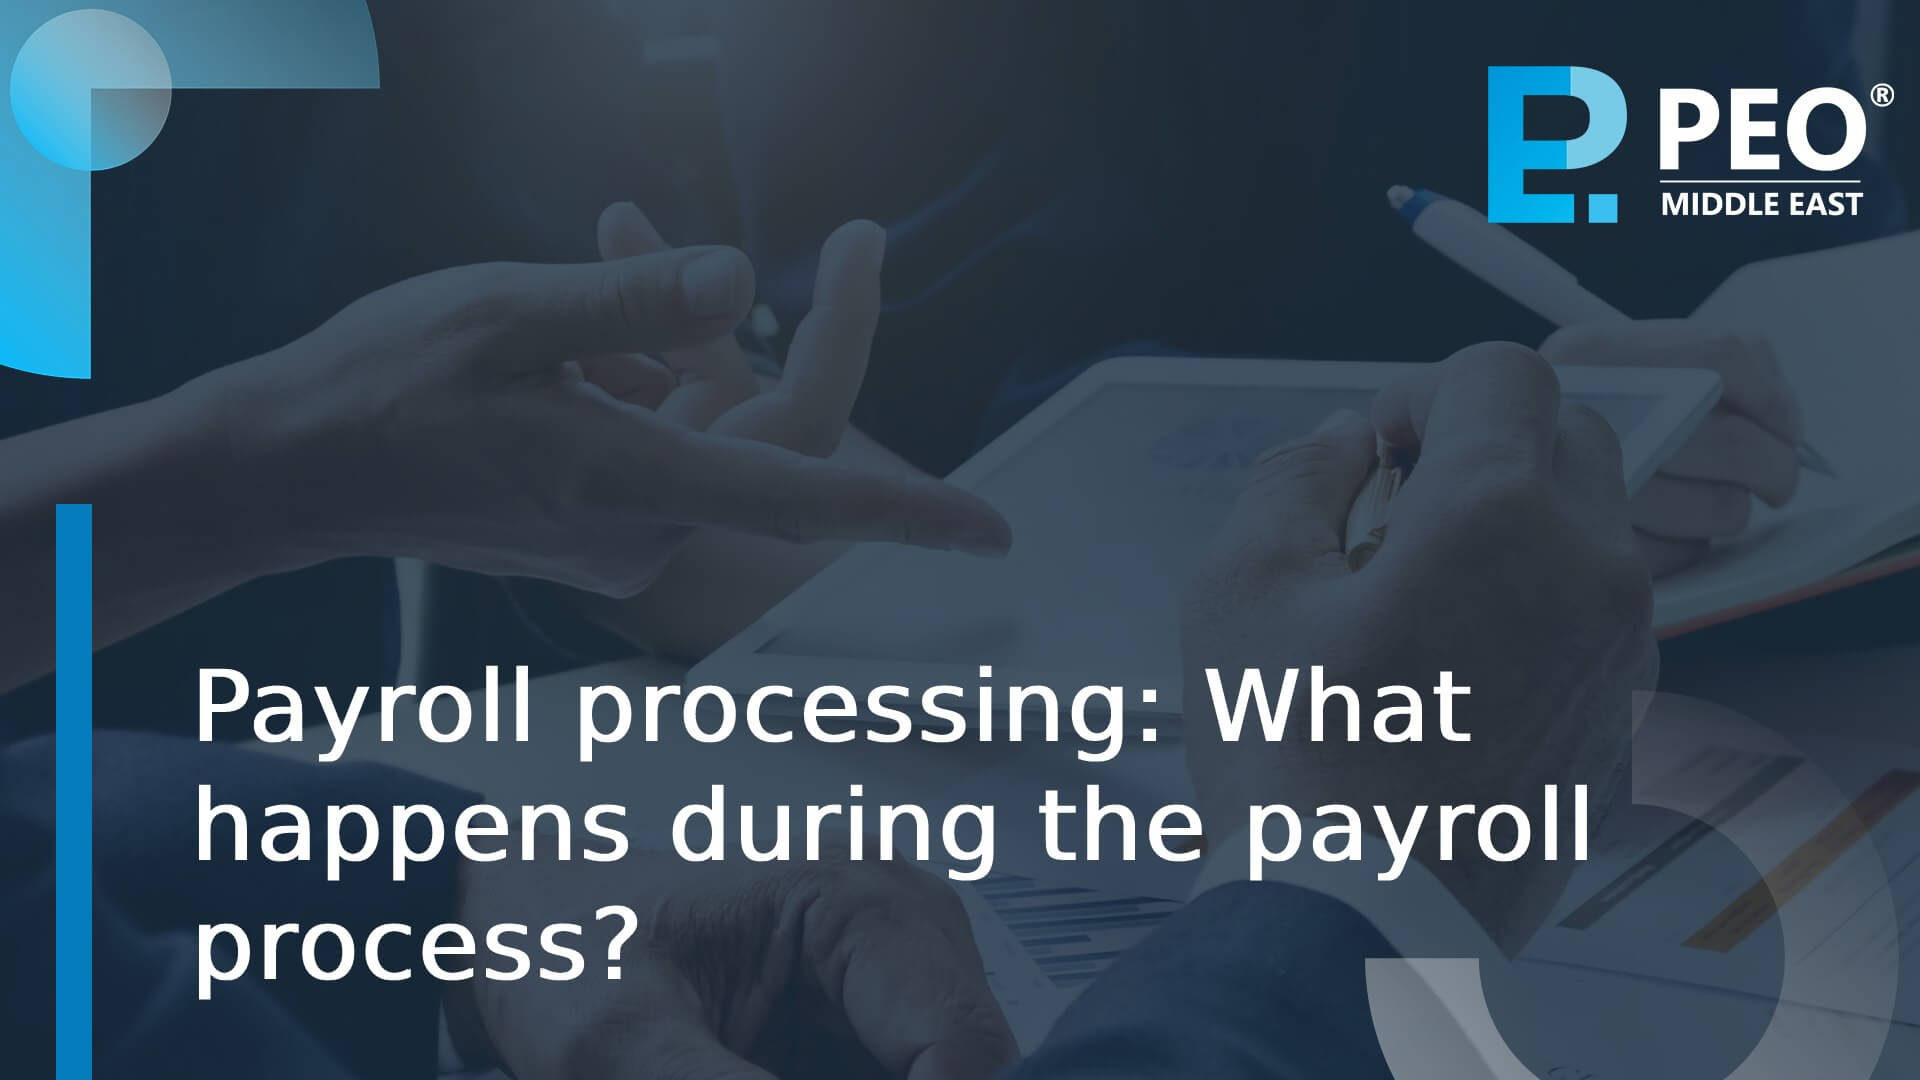 Payroll processing: What happens during the payroll process?